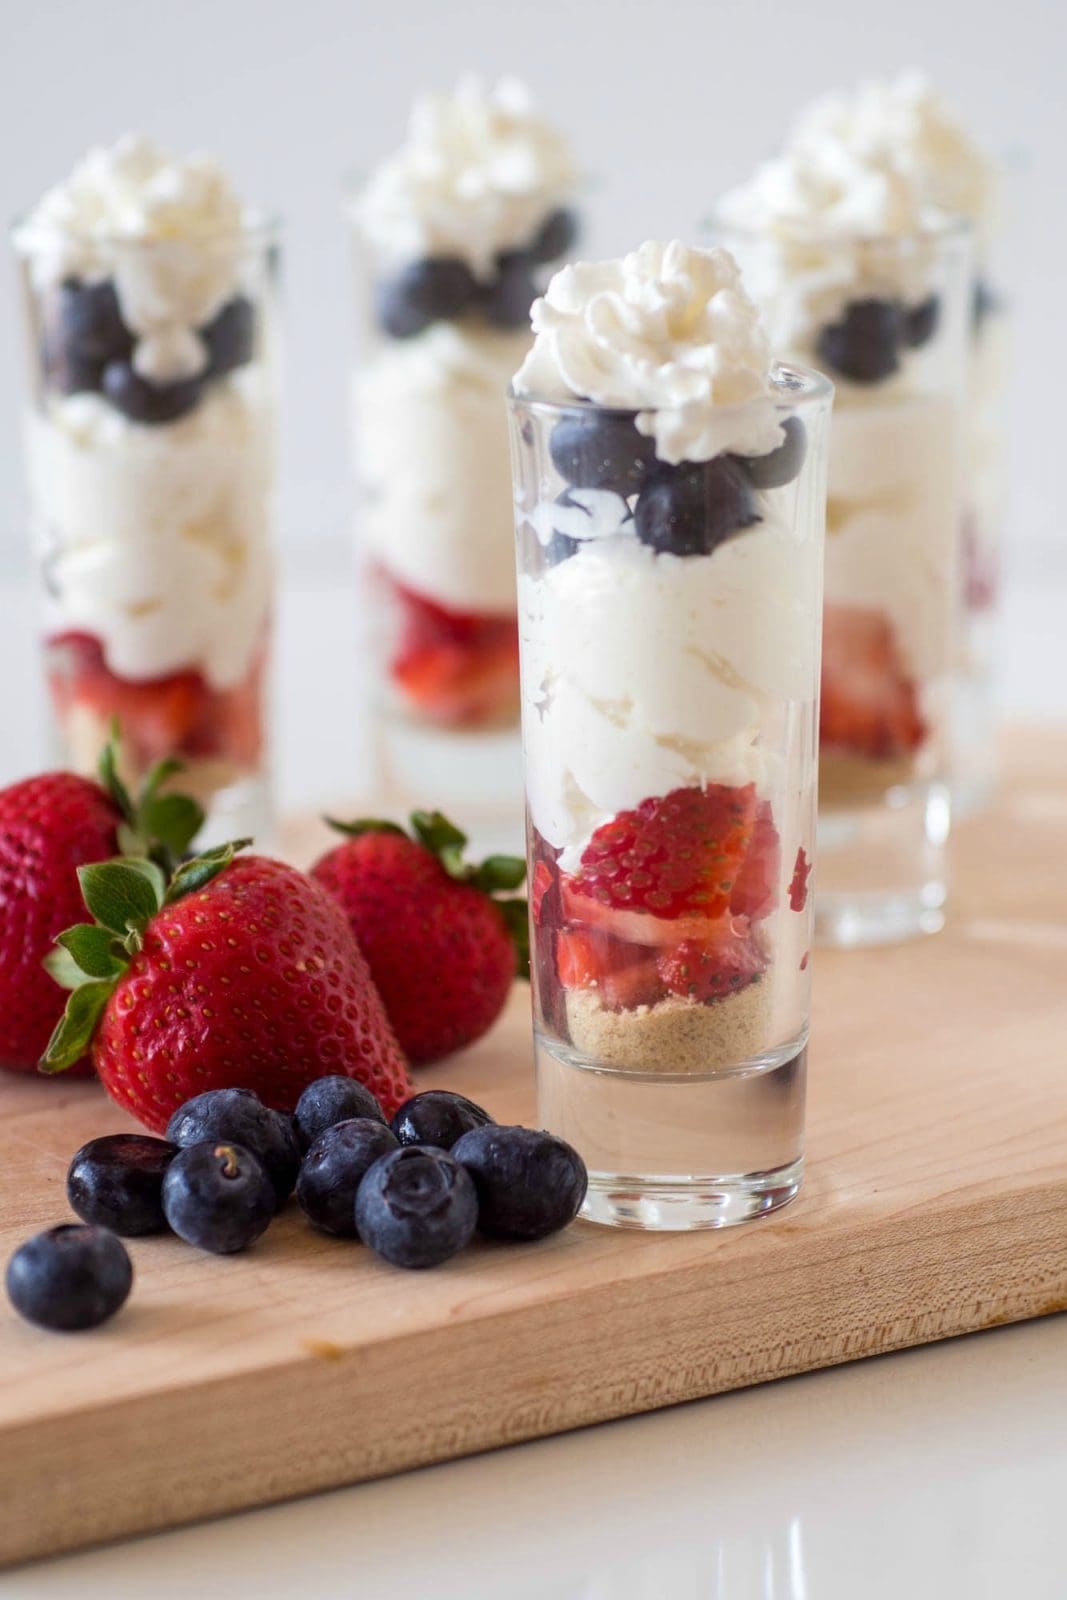 No Bake Patriotic Cheesecake Parfaits - an easy summer time dessert which pairs strawberries, blueberries, and cheesecake for a red, white and blue treat #4thofjuly #patriotic #nobake #cheesecake